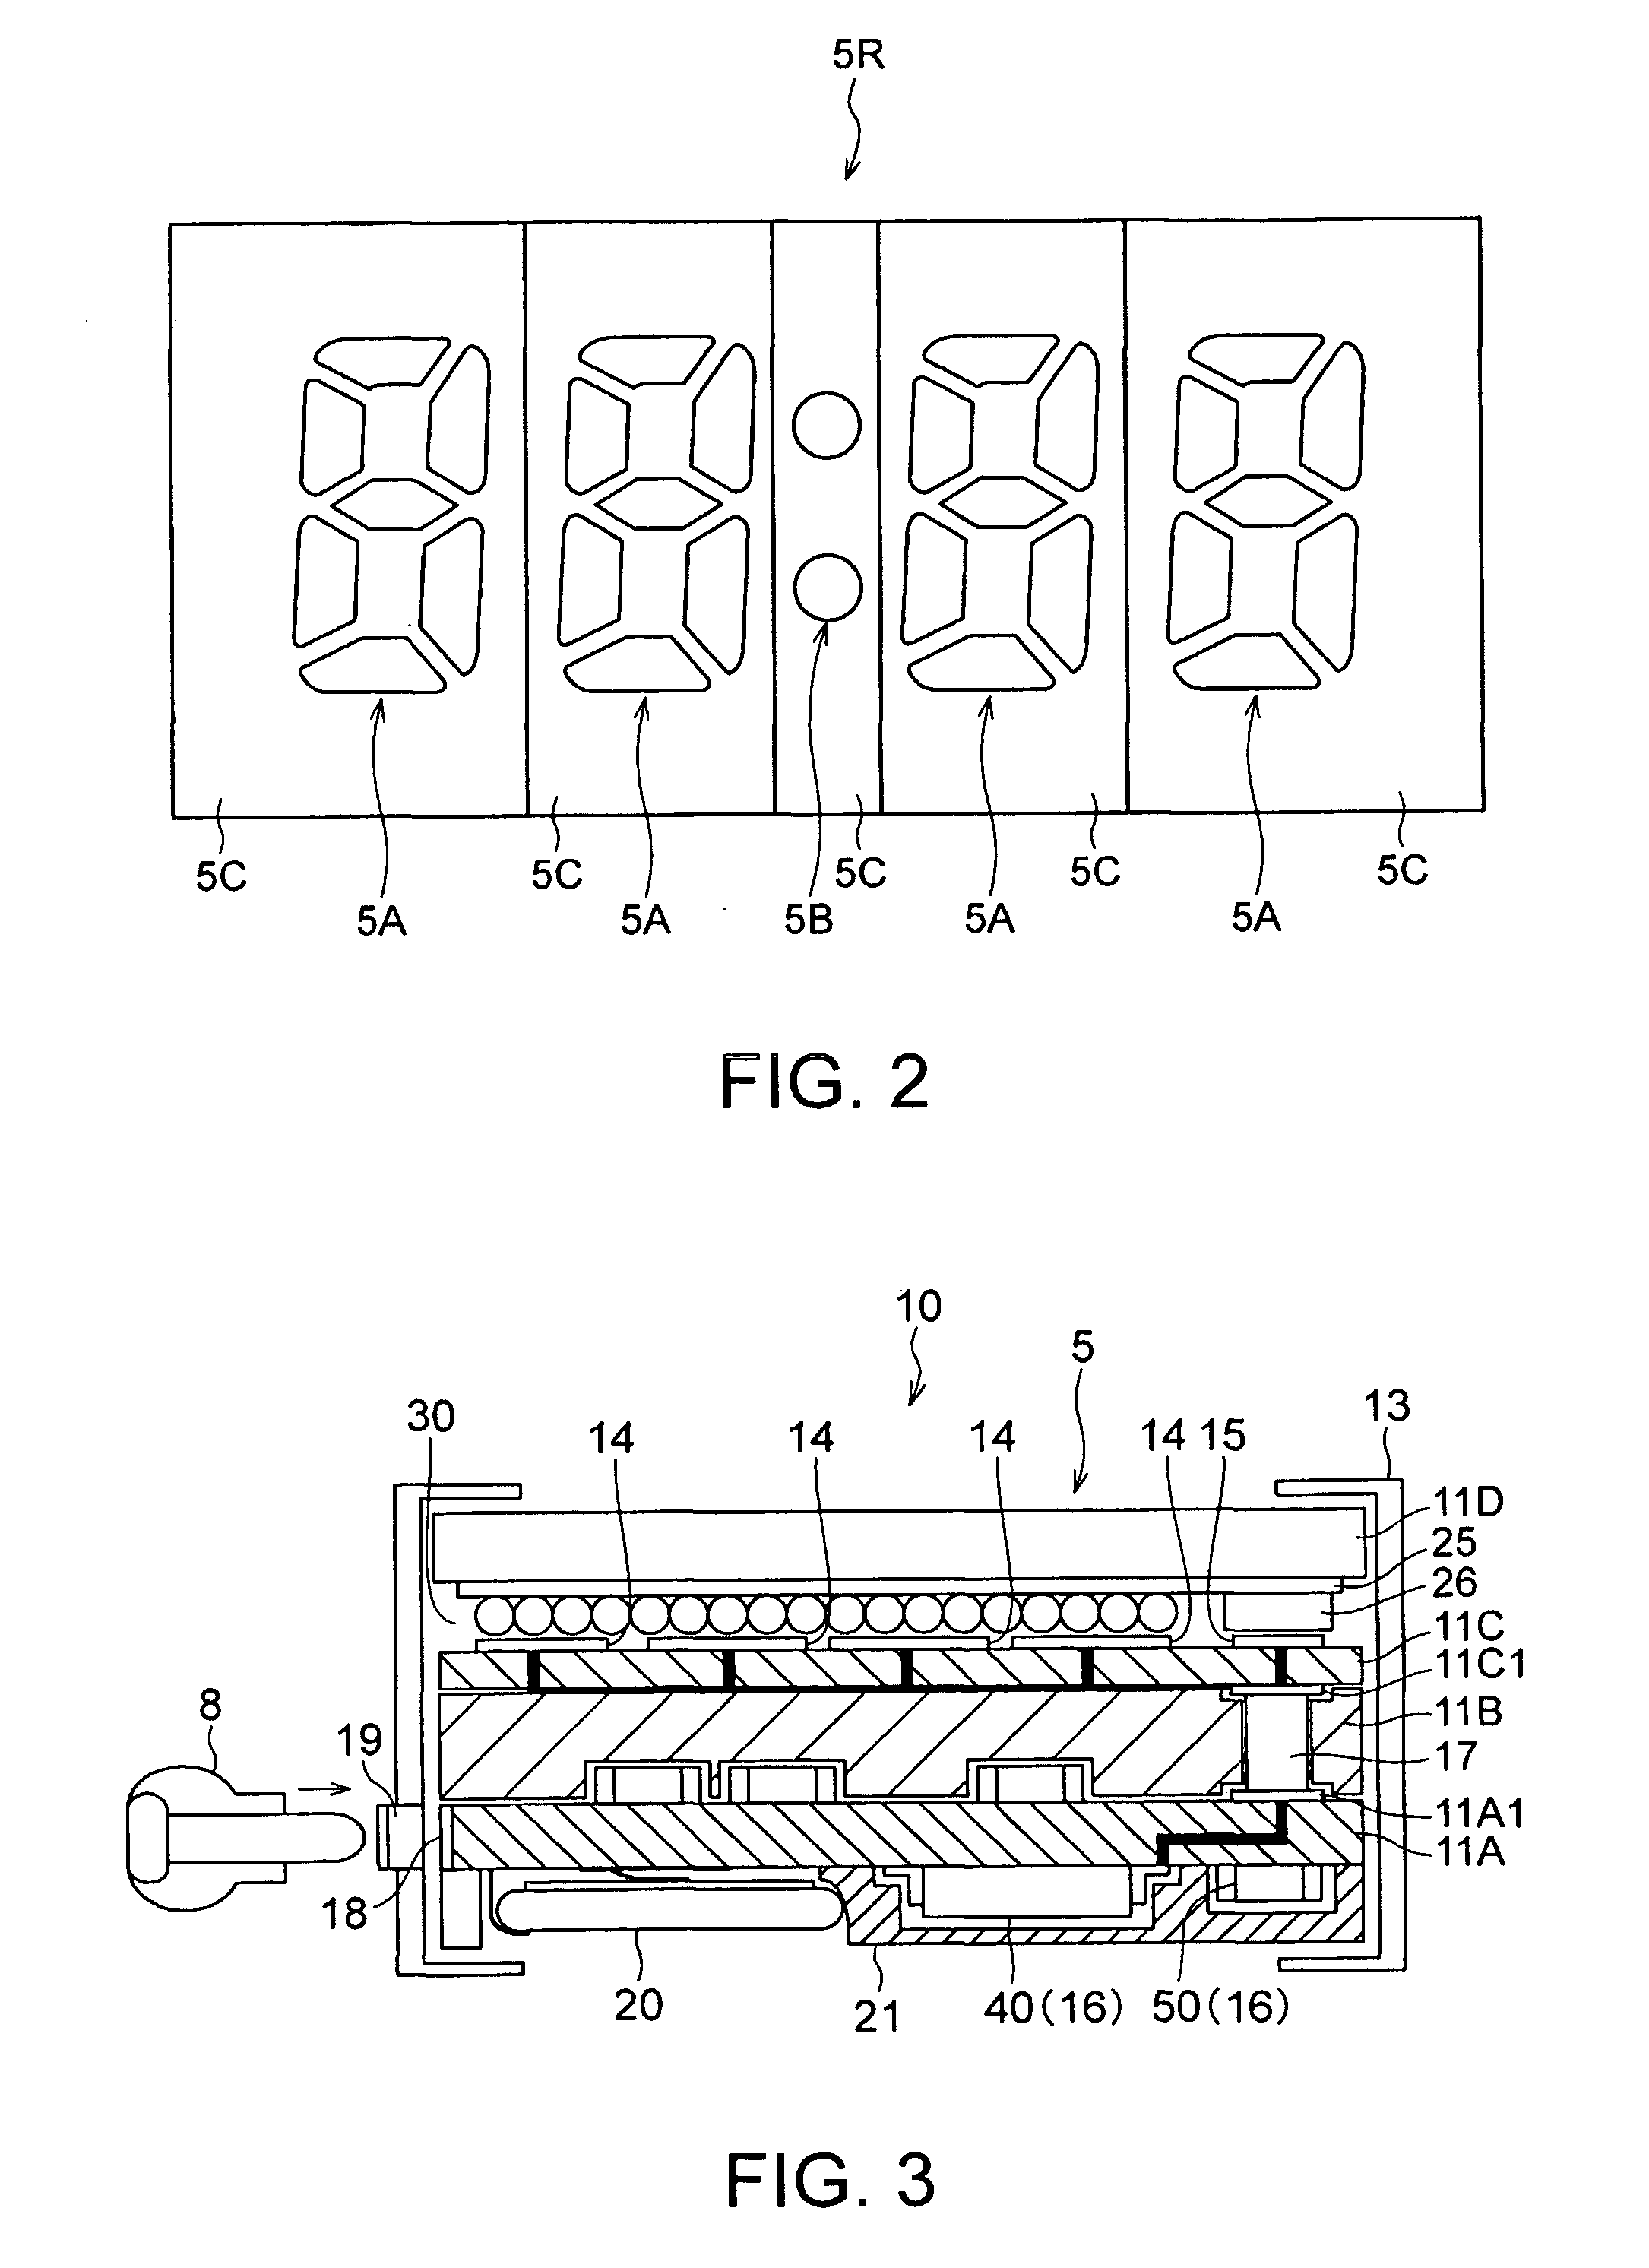 Display control apparatus, display device, and control method for a display device